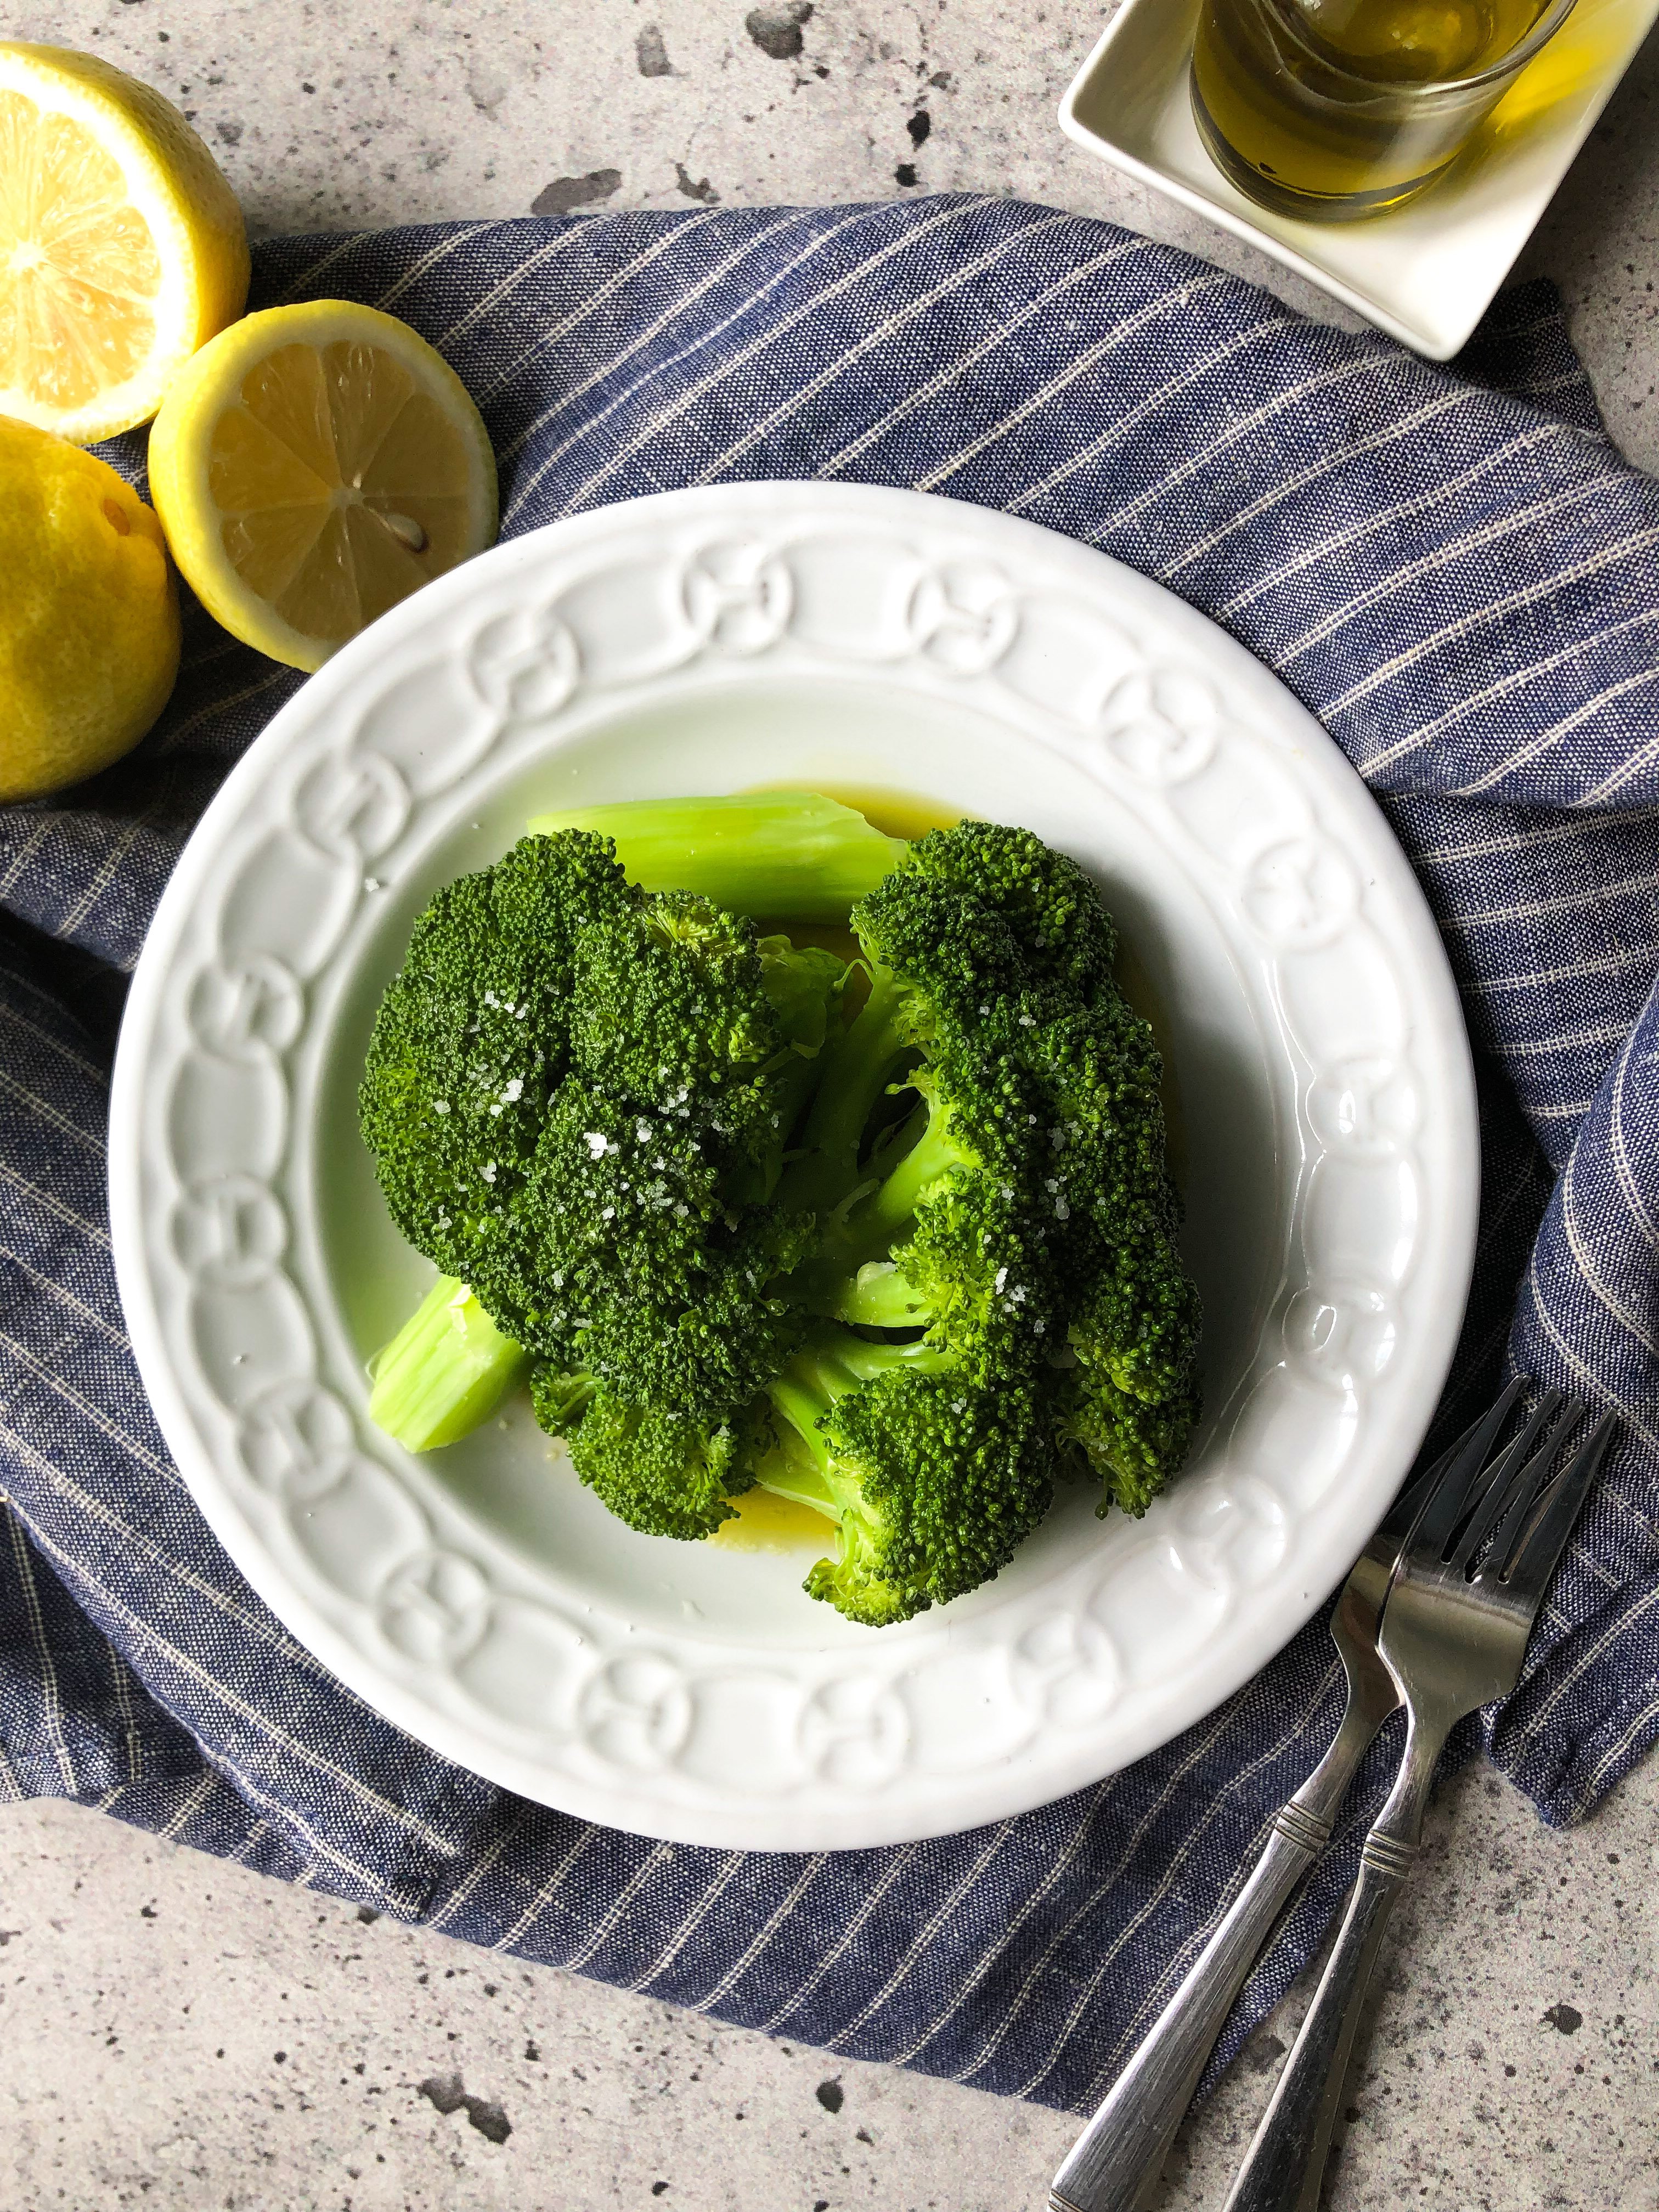 Broccoli with olive oil and lemon